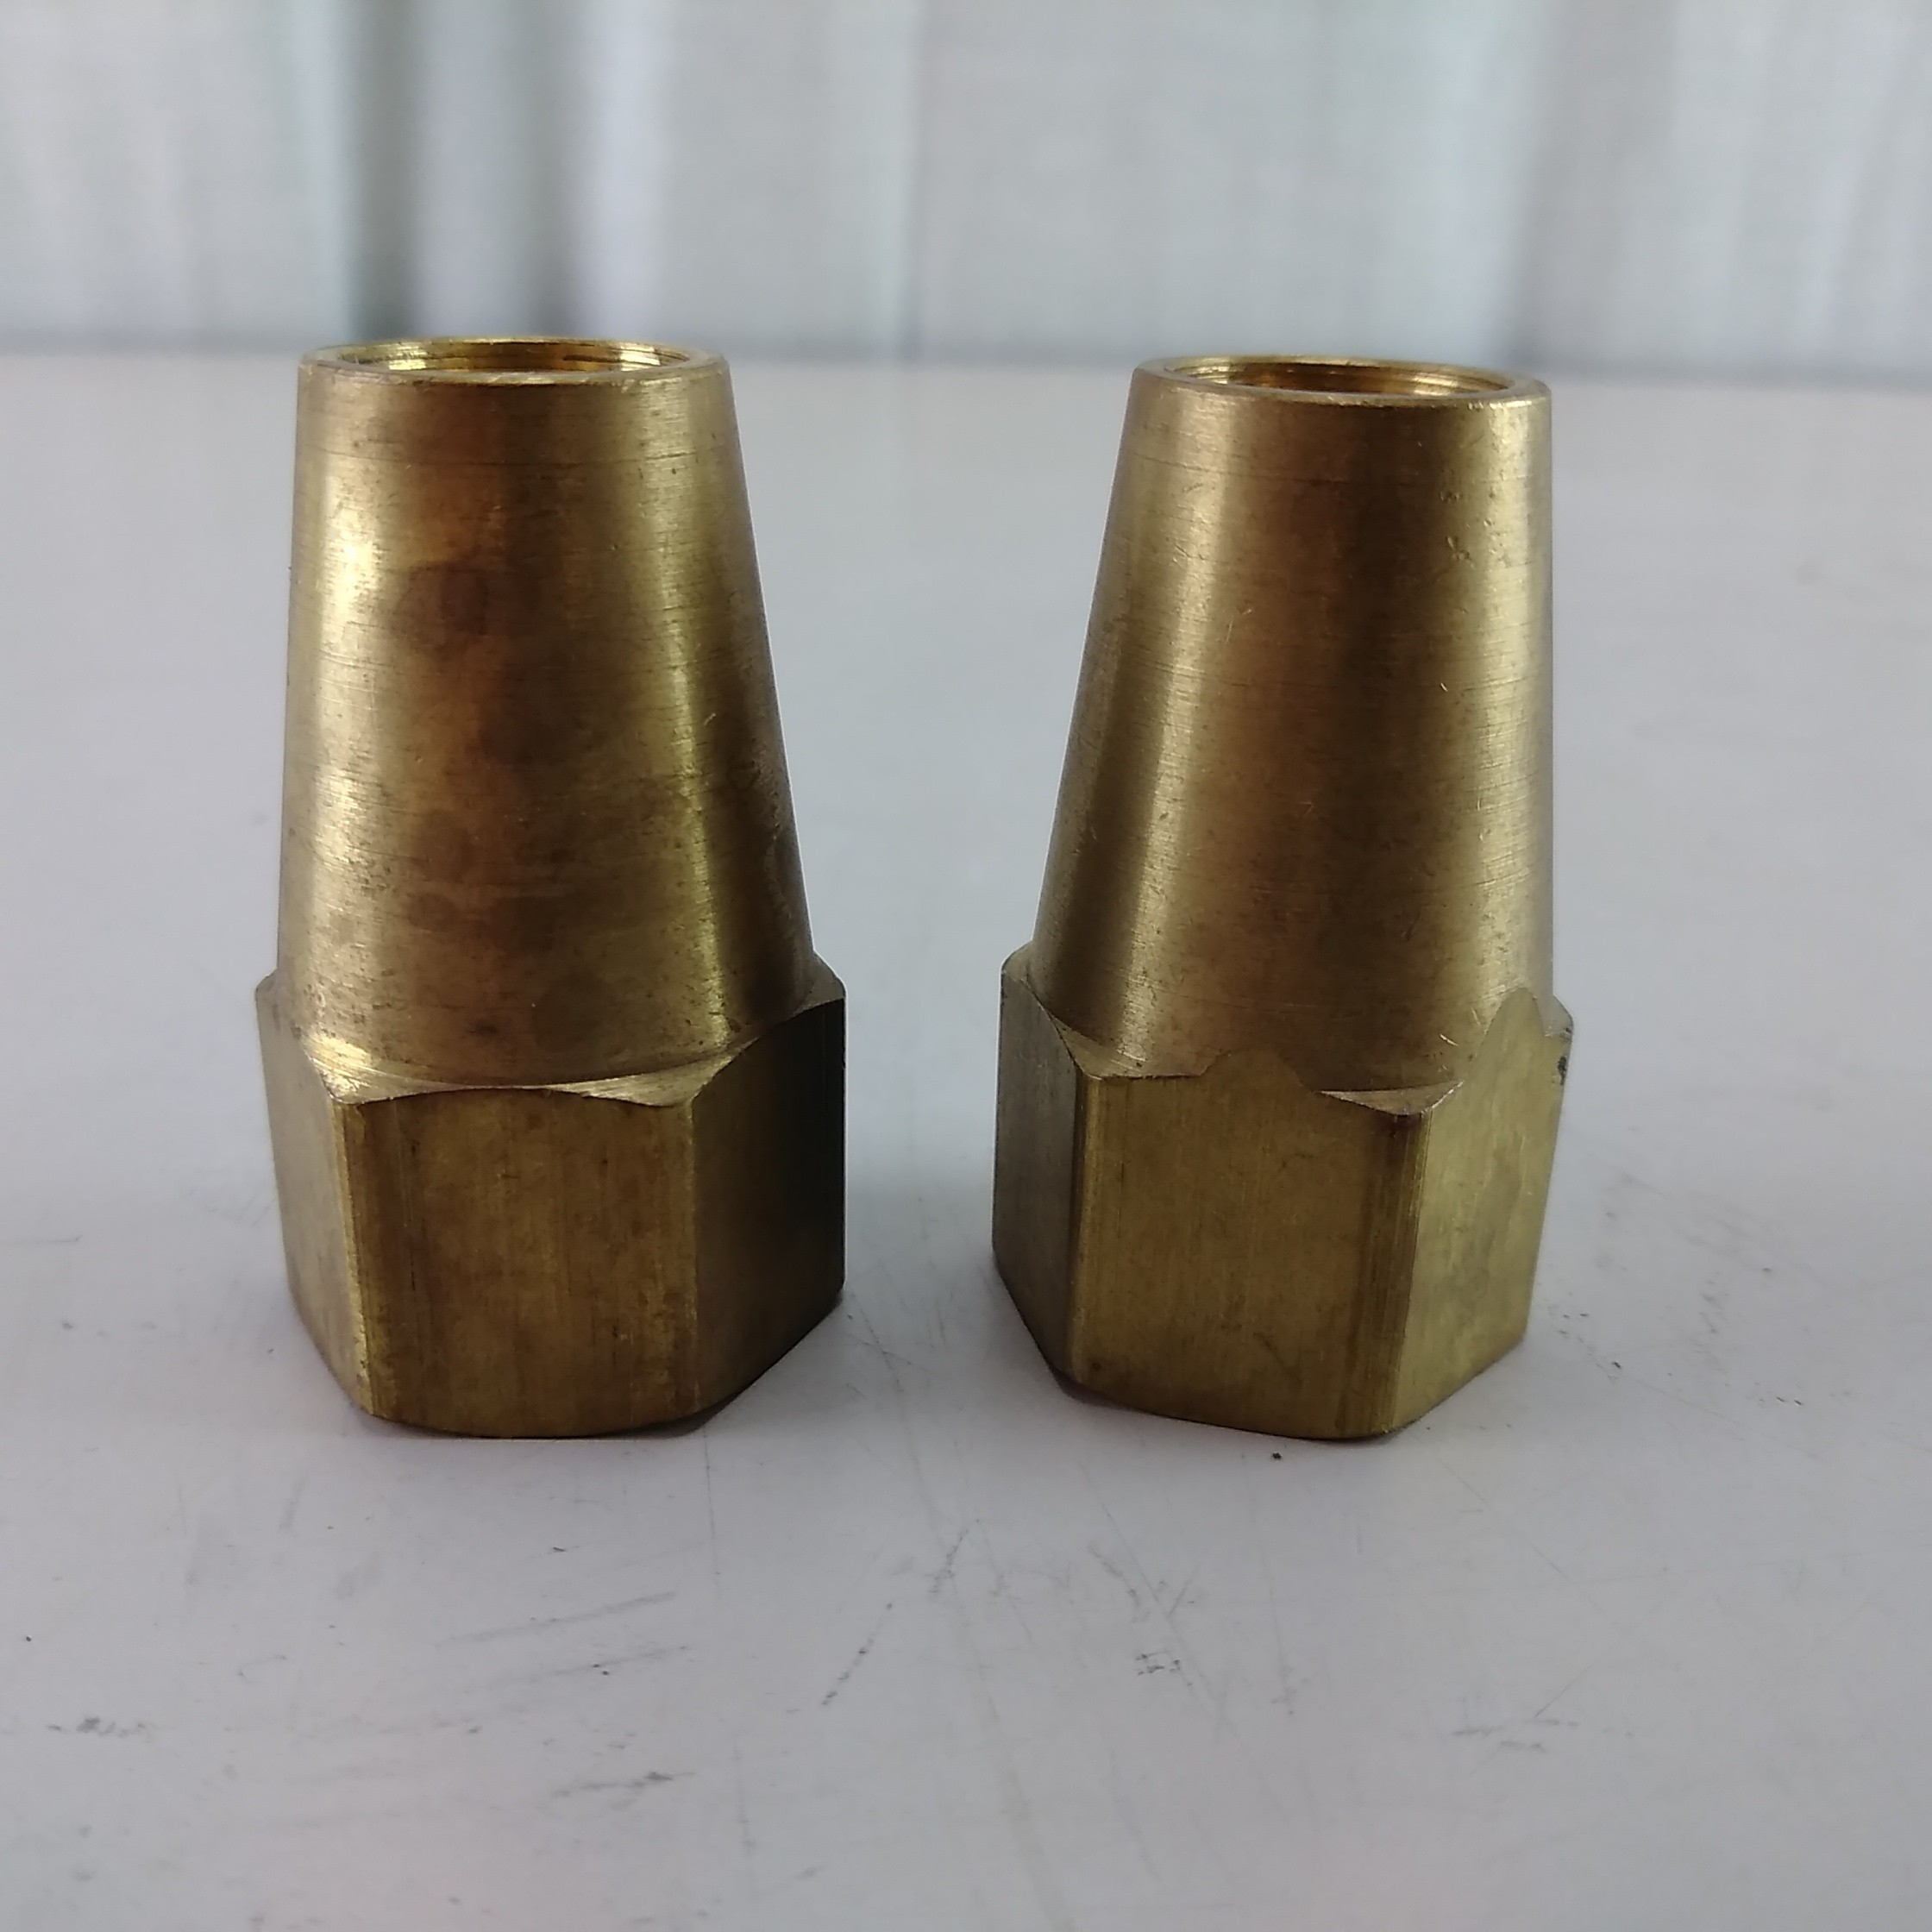 Lot of 2 1/2" Long Flare Nut Fitting 45 Degree Flare NEW